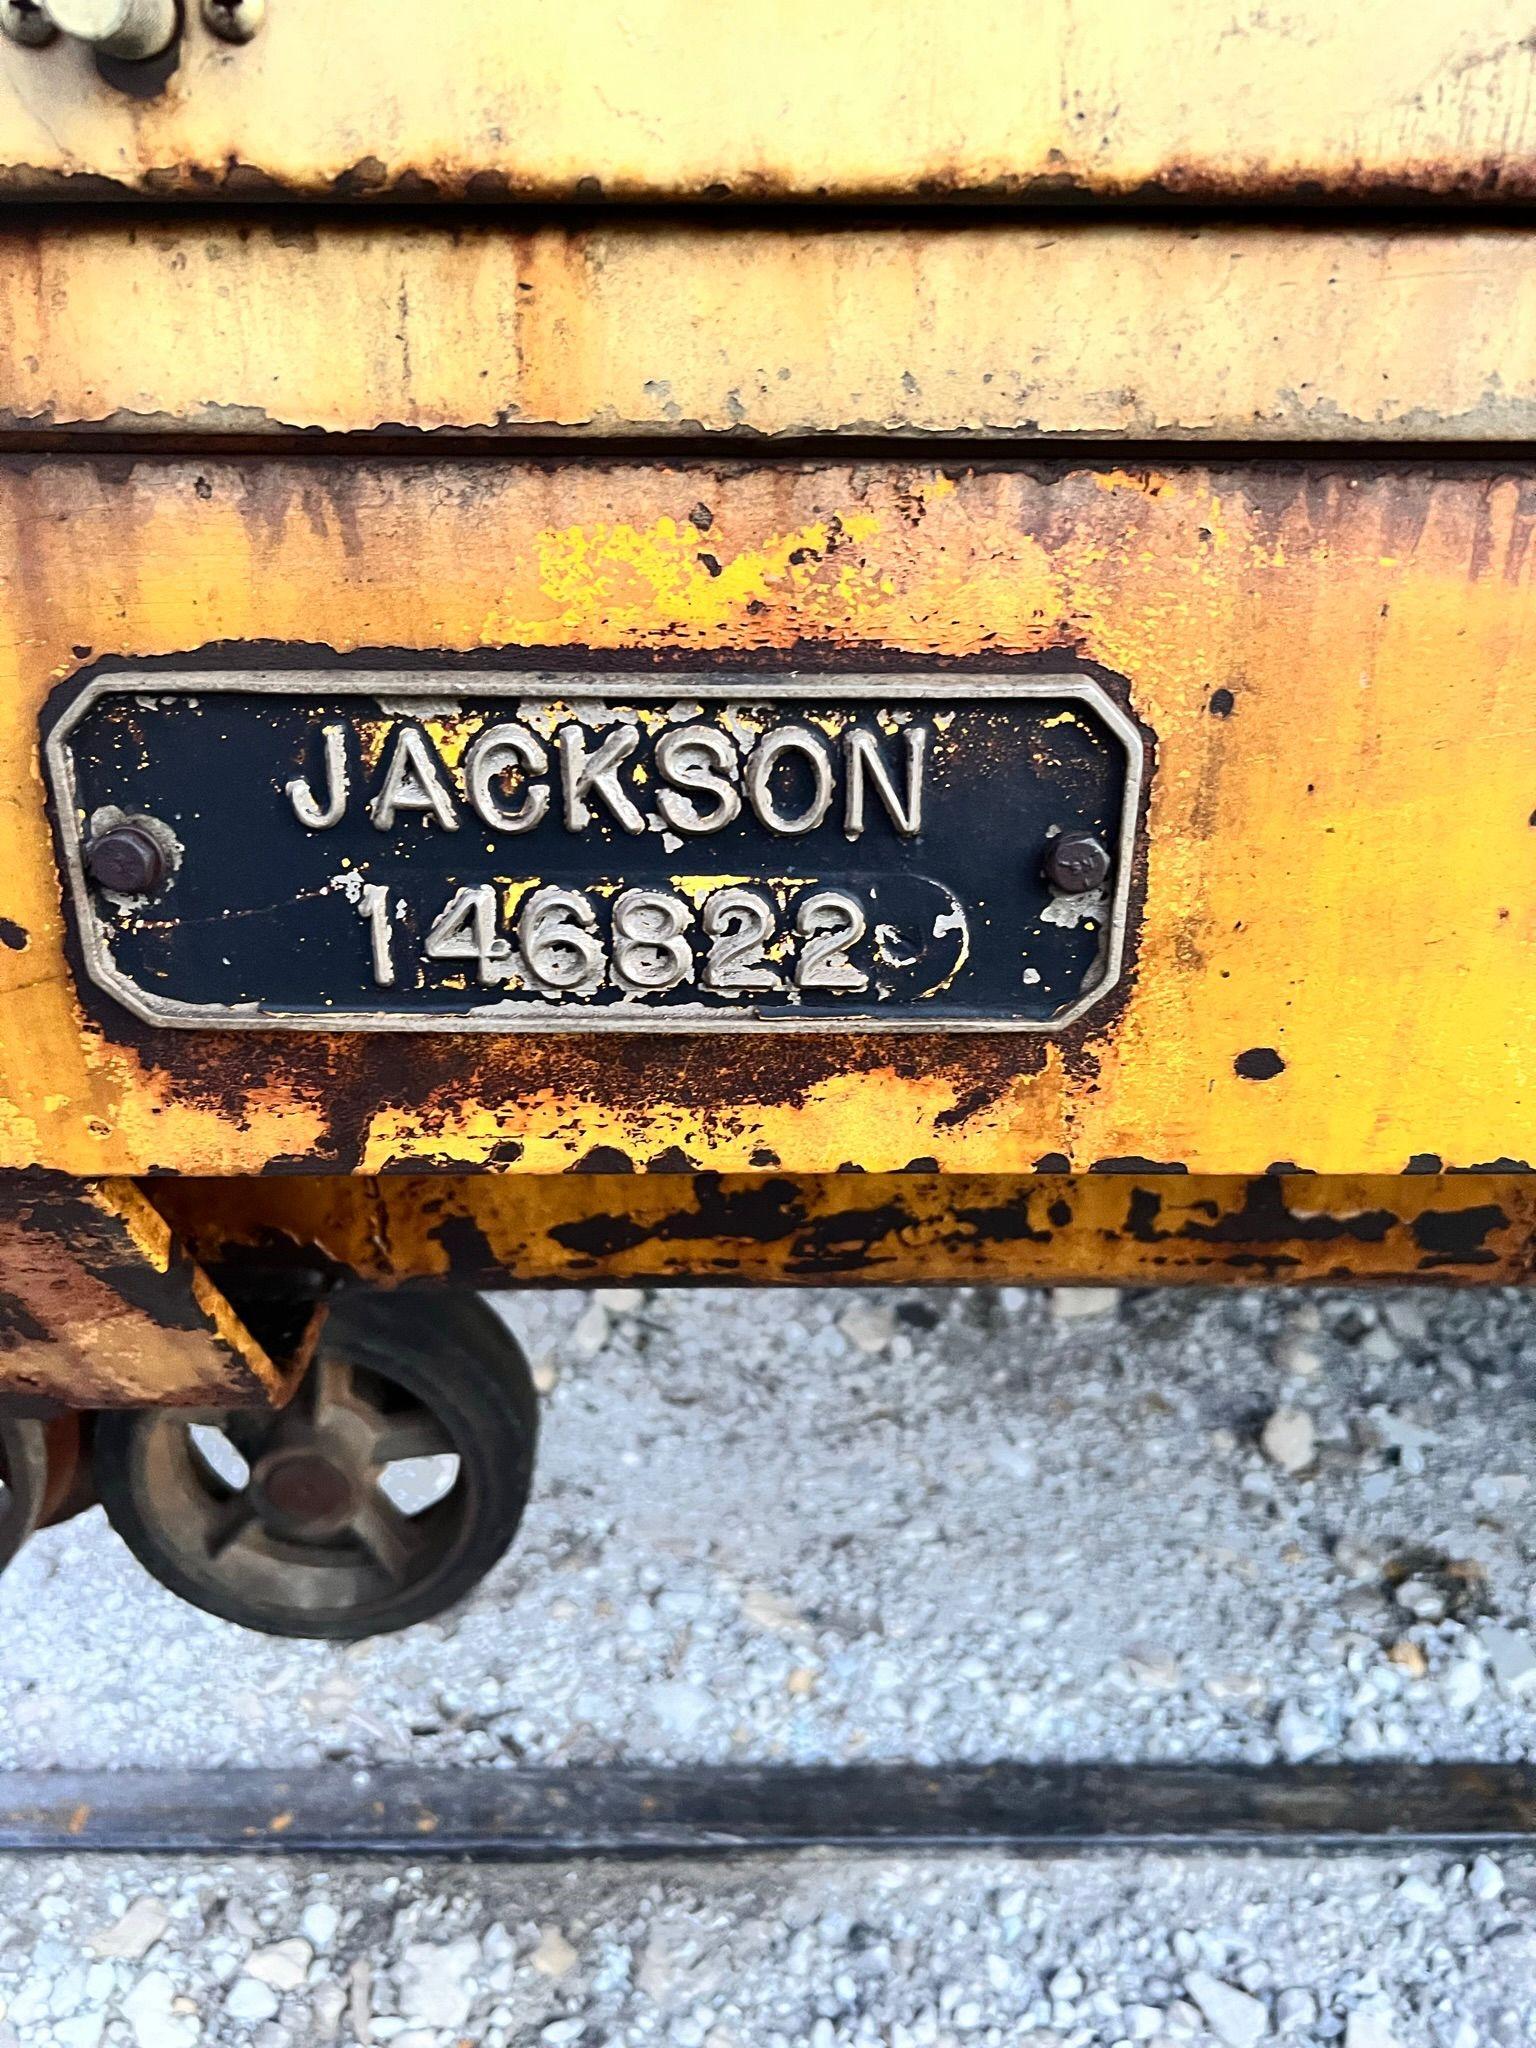 JACKSON 6700 SWITCH/PRODUCTION TAMPER,  – RUNS – LOCATED AT 27 HARRIS AVE M